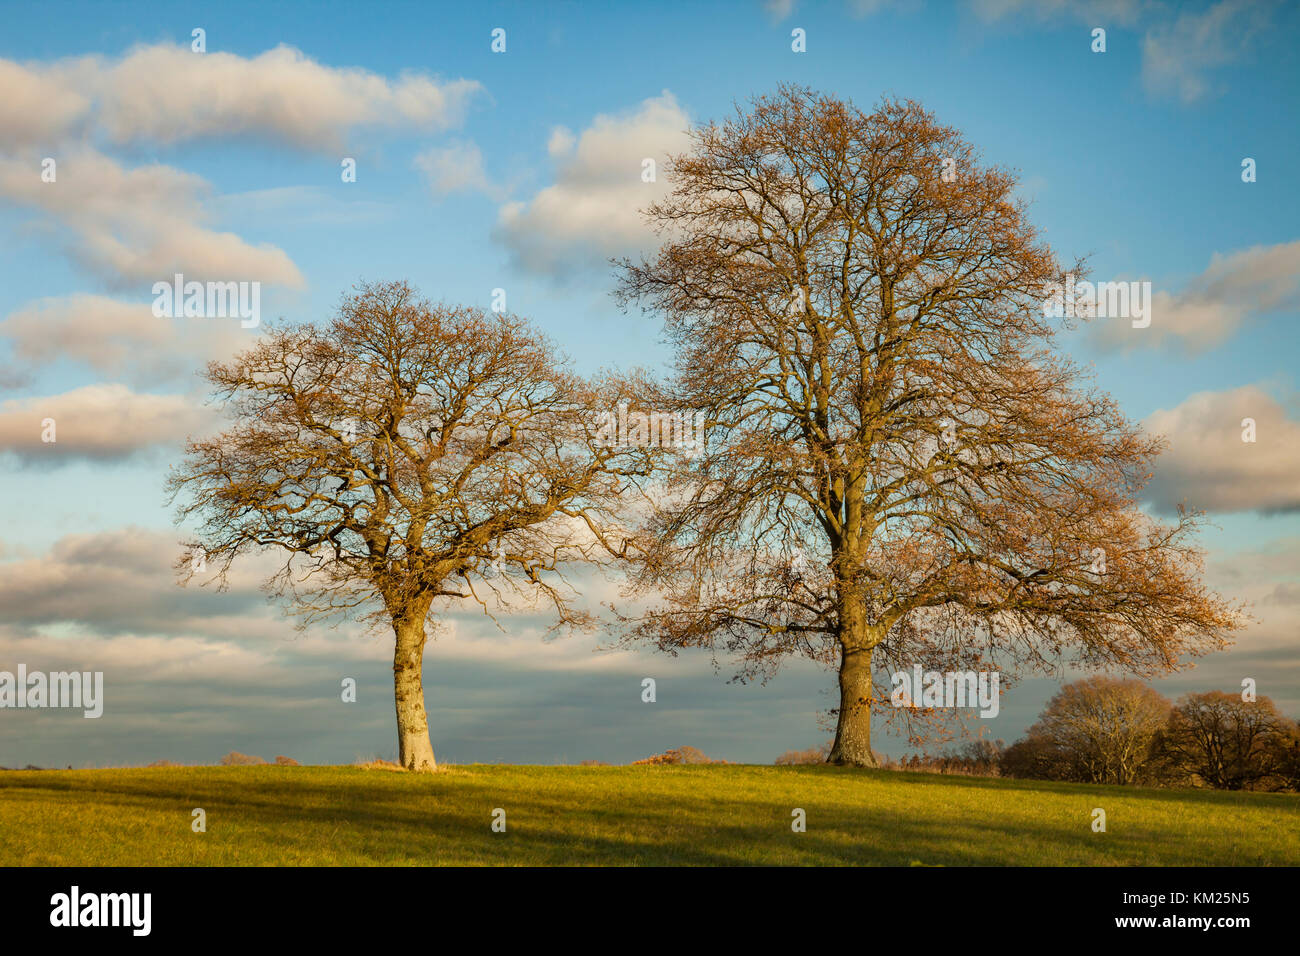 Autumn afternoon in the English countryside, West Sussex. Stock Photo